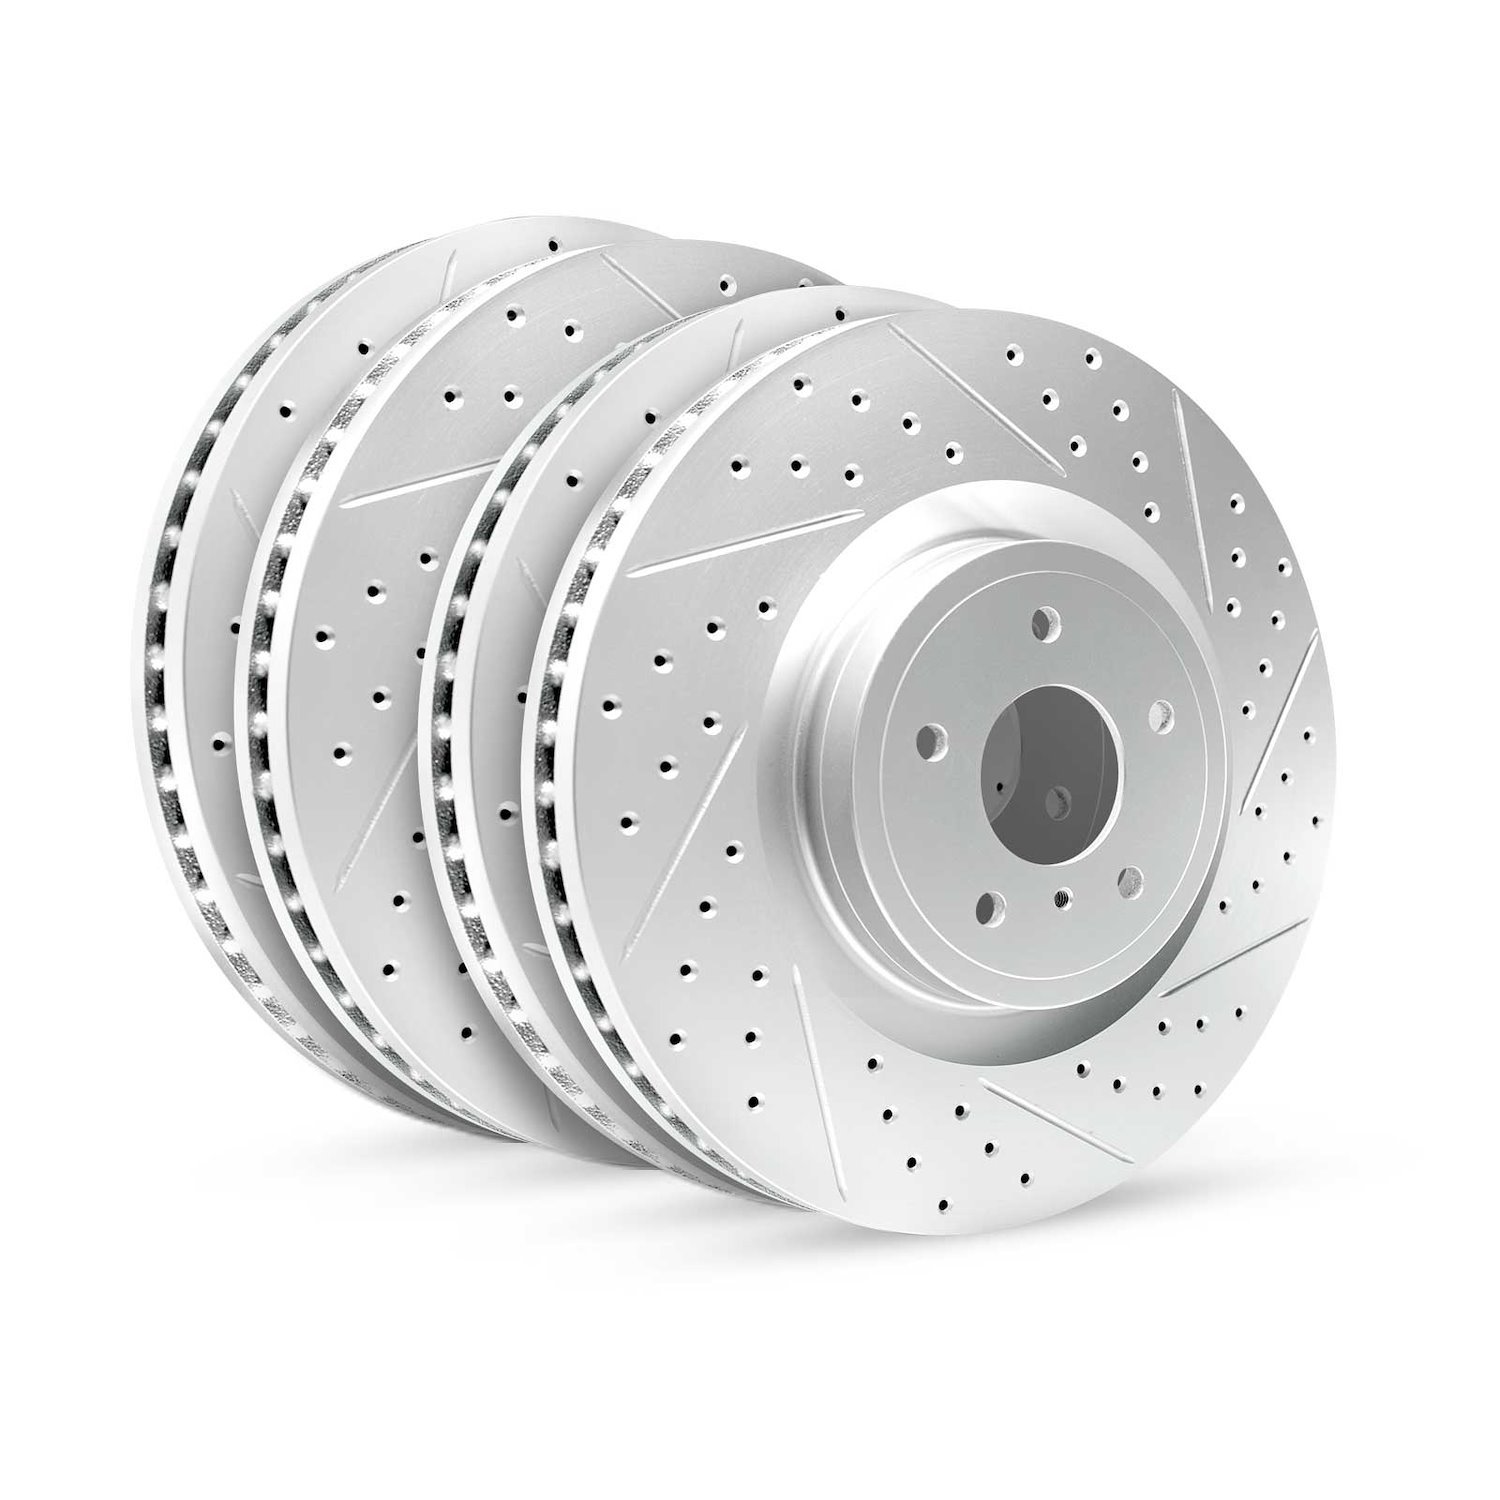 GEO-Carbon Drilled/Slotted Rotors, 2006-2009 Land Rover,